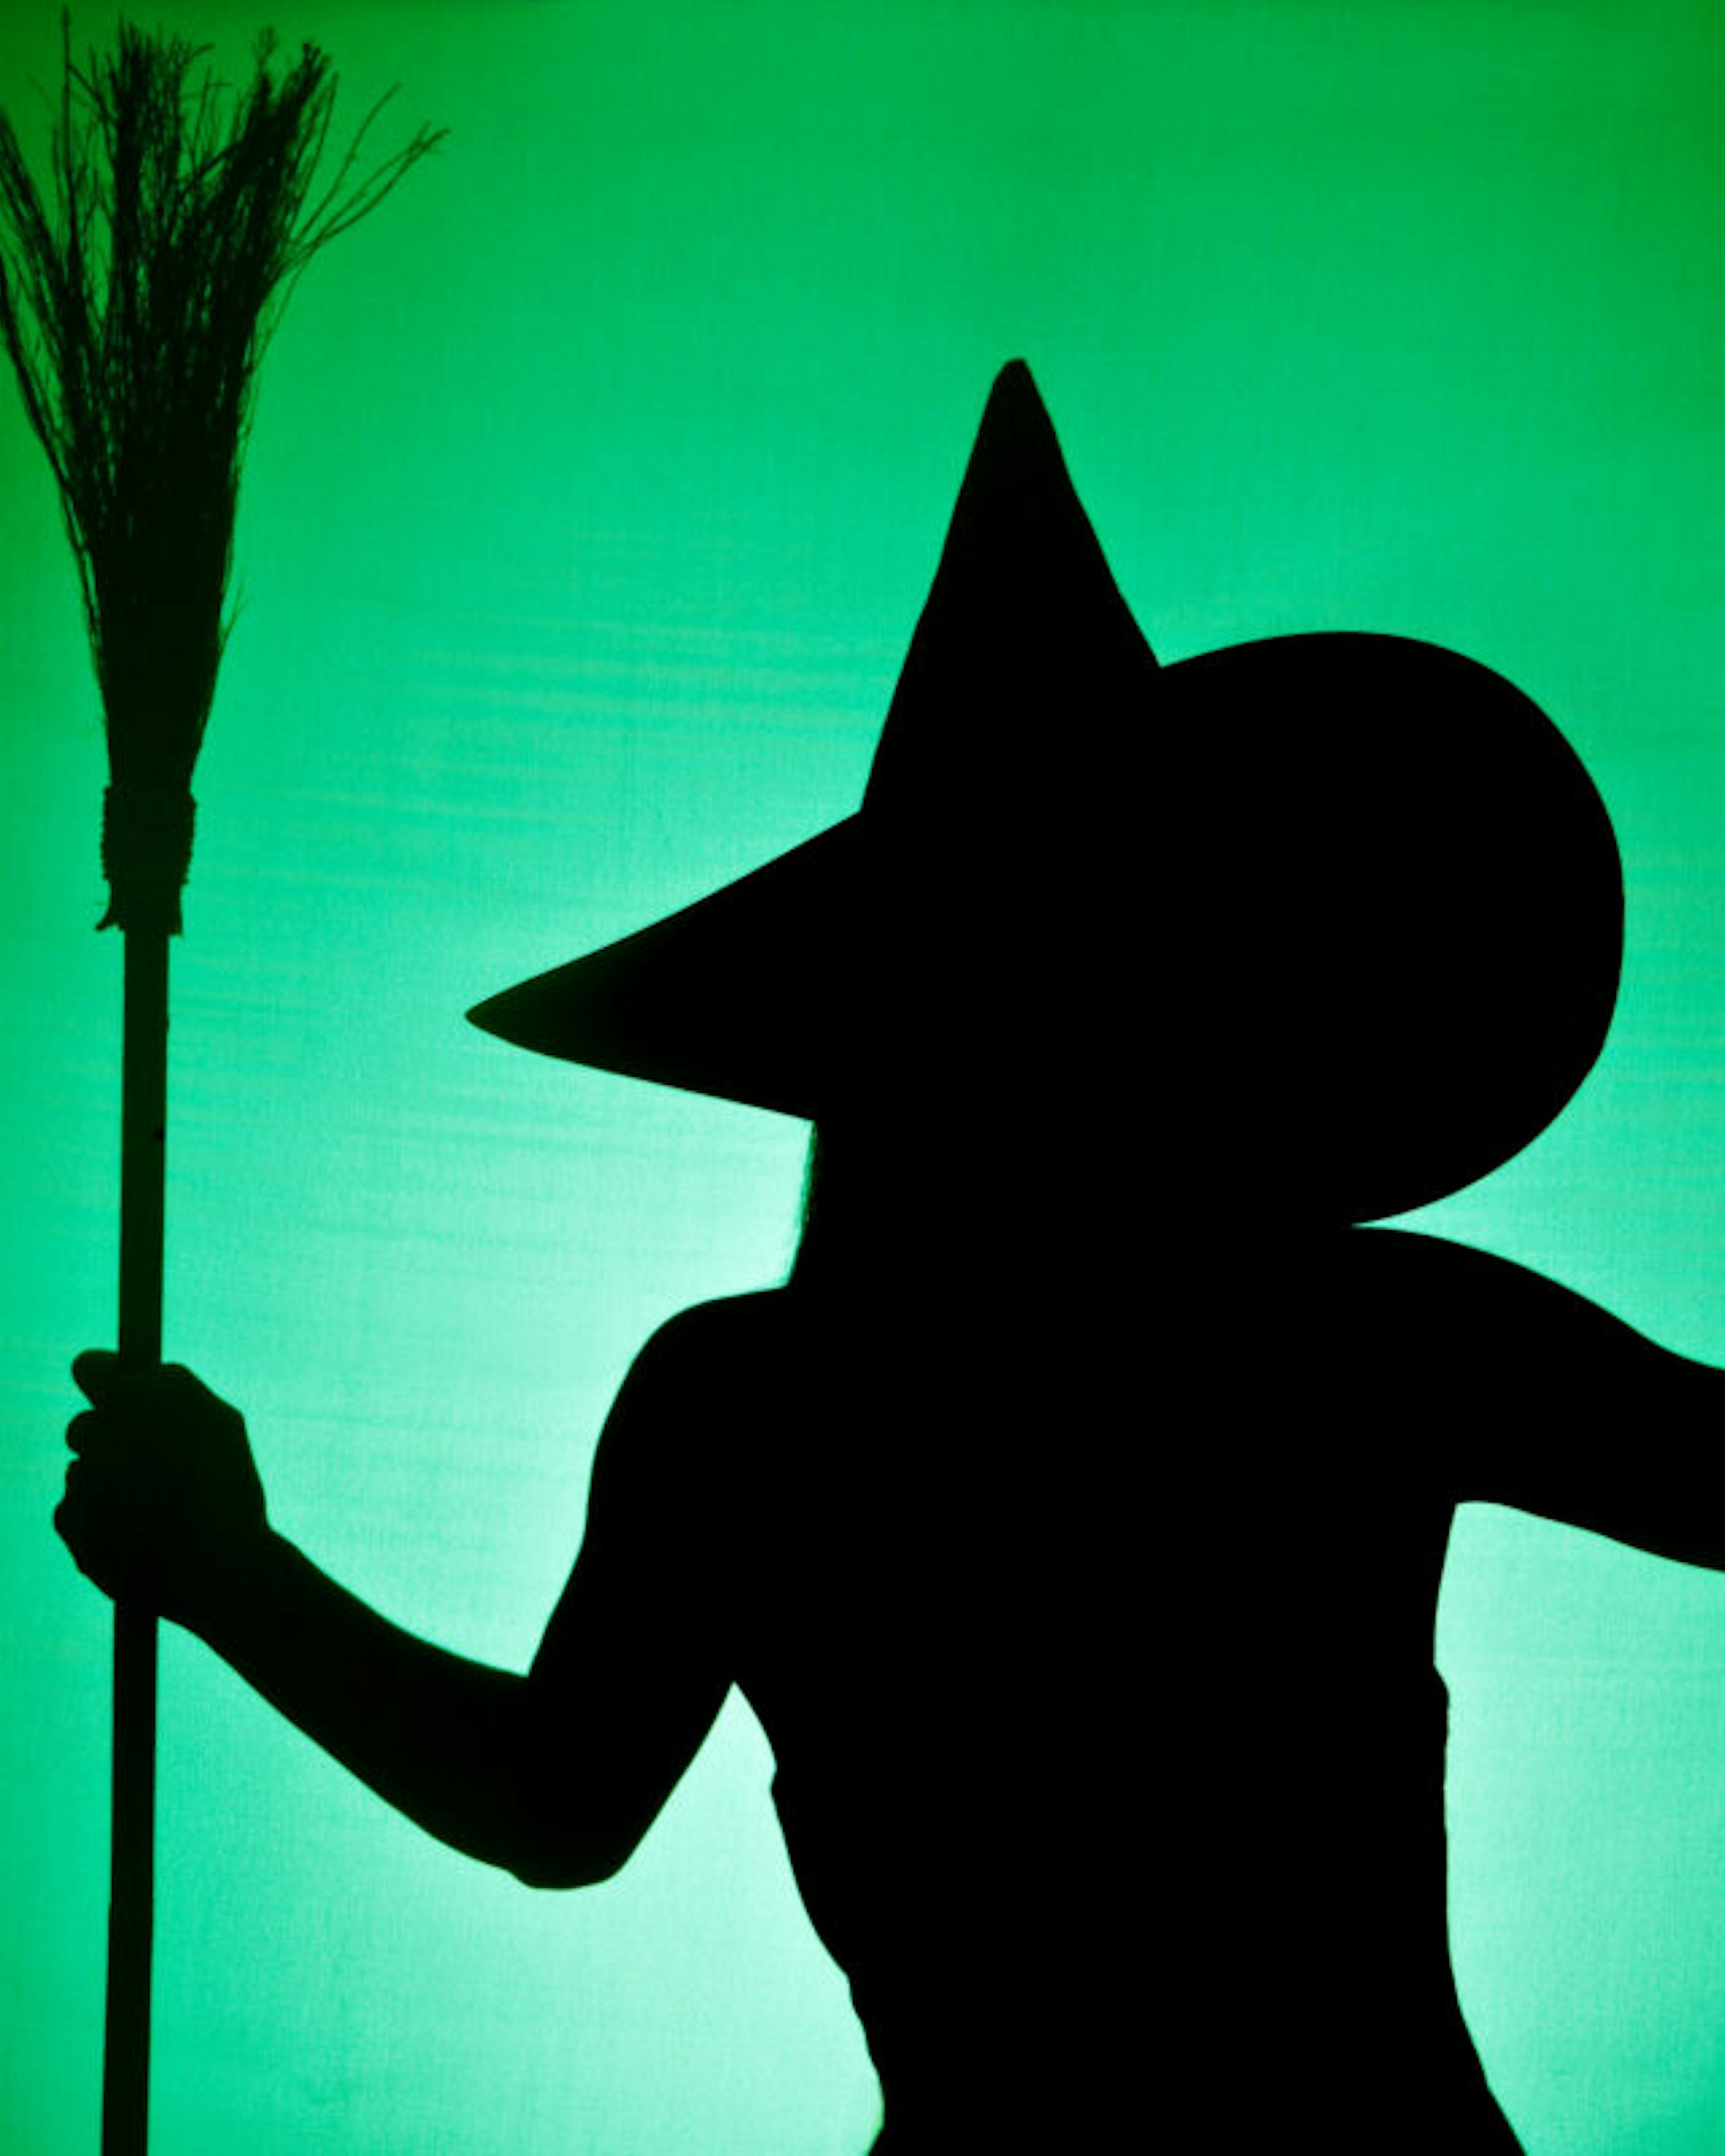 A green and black silhouette of a wicked witch holding her broom.